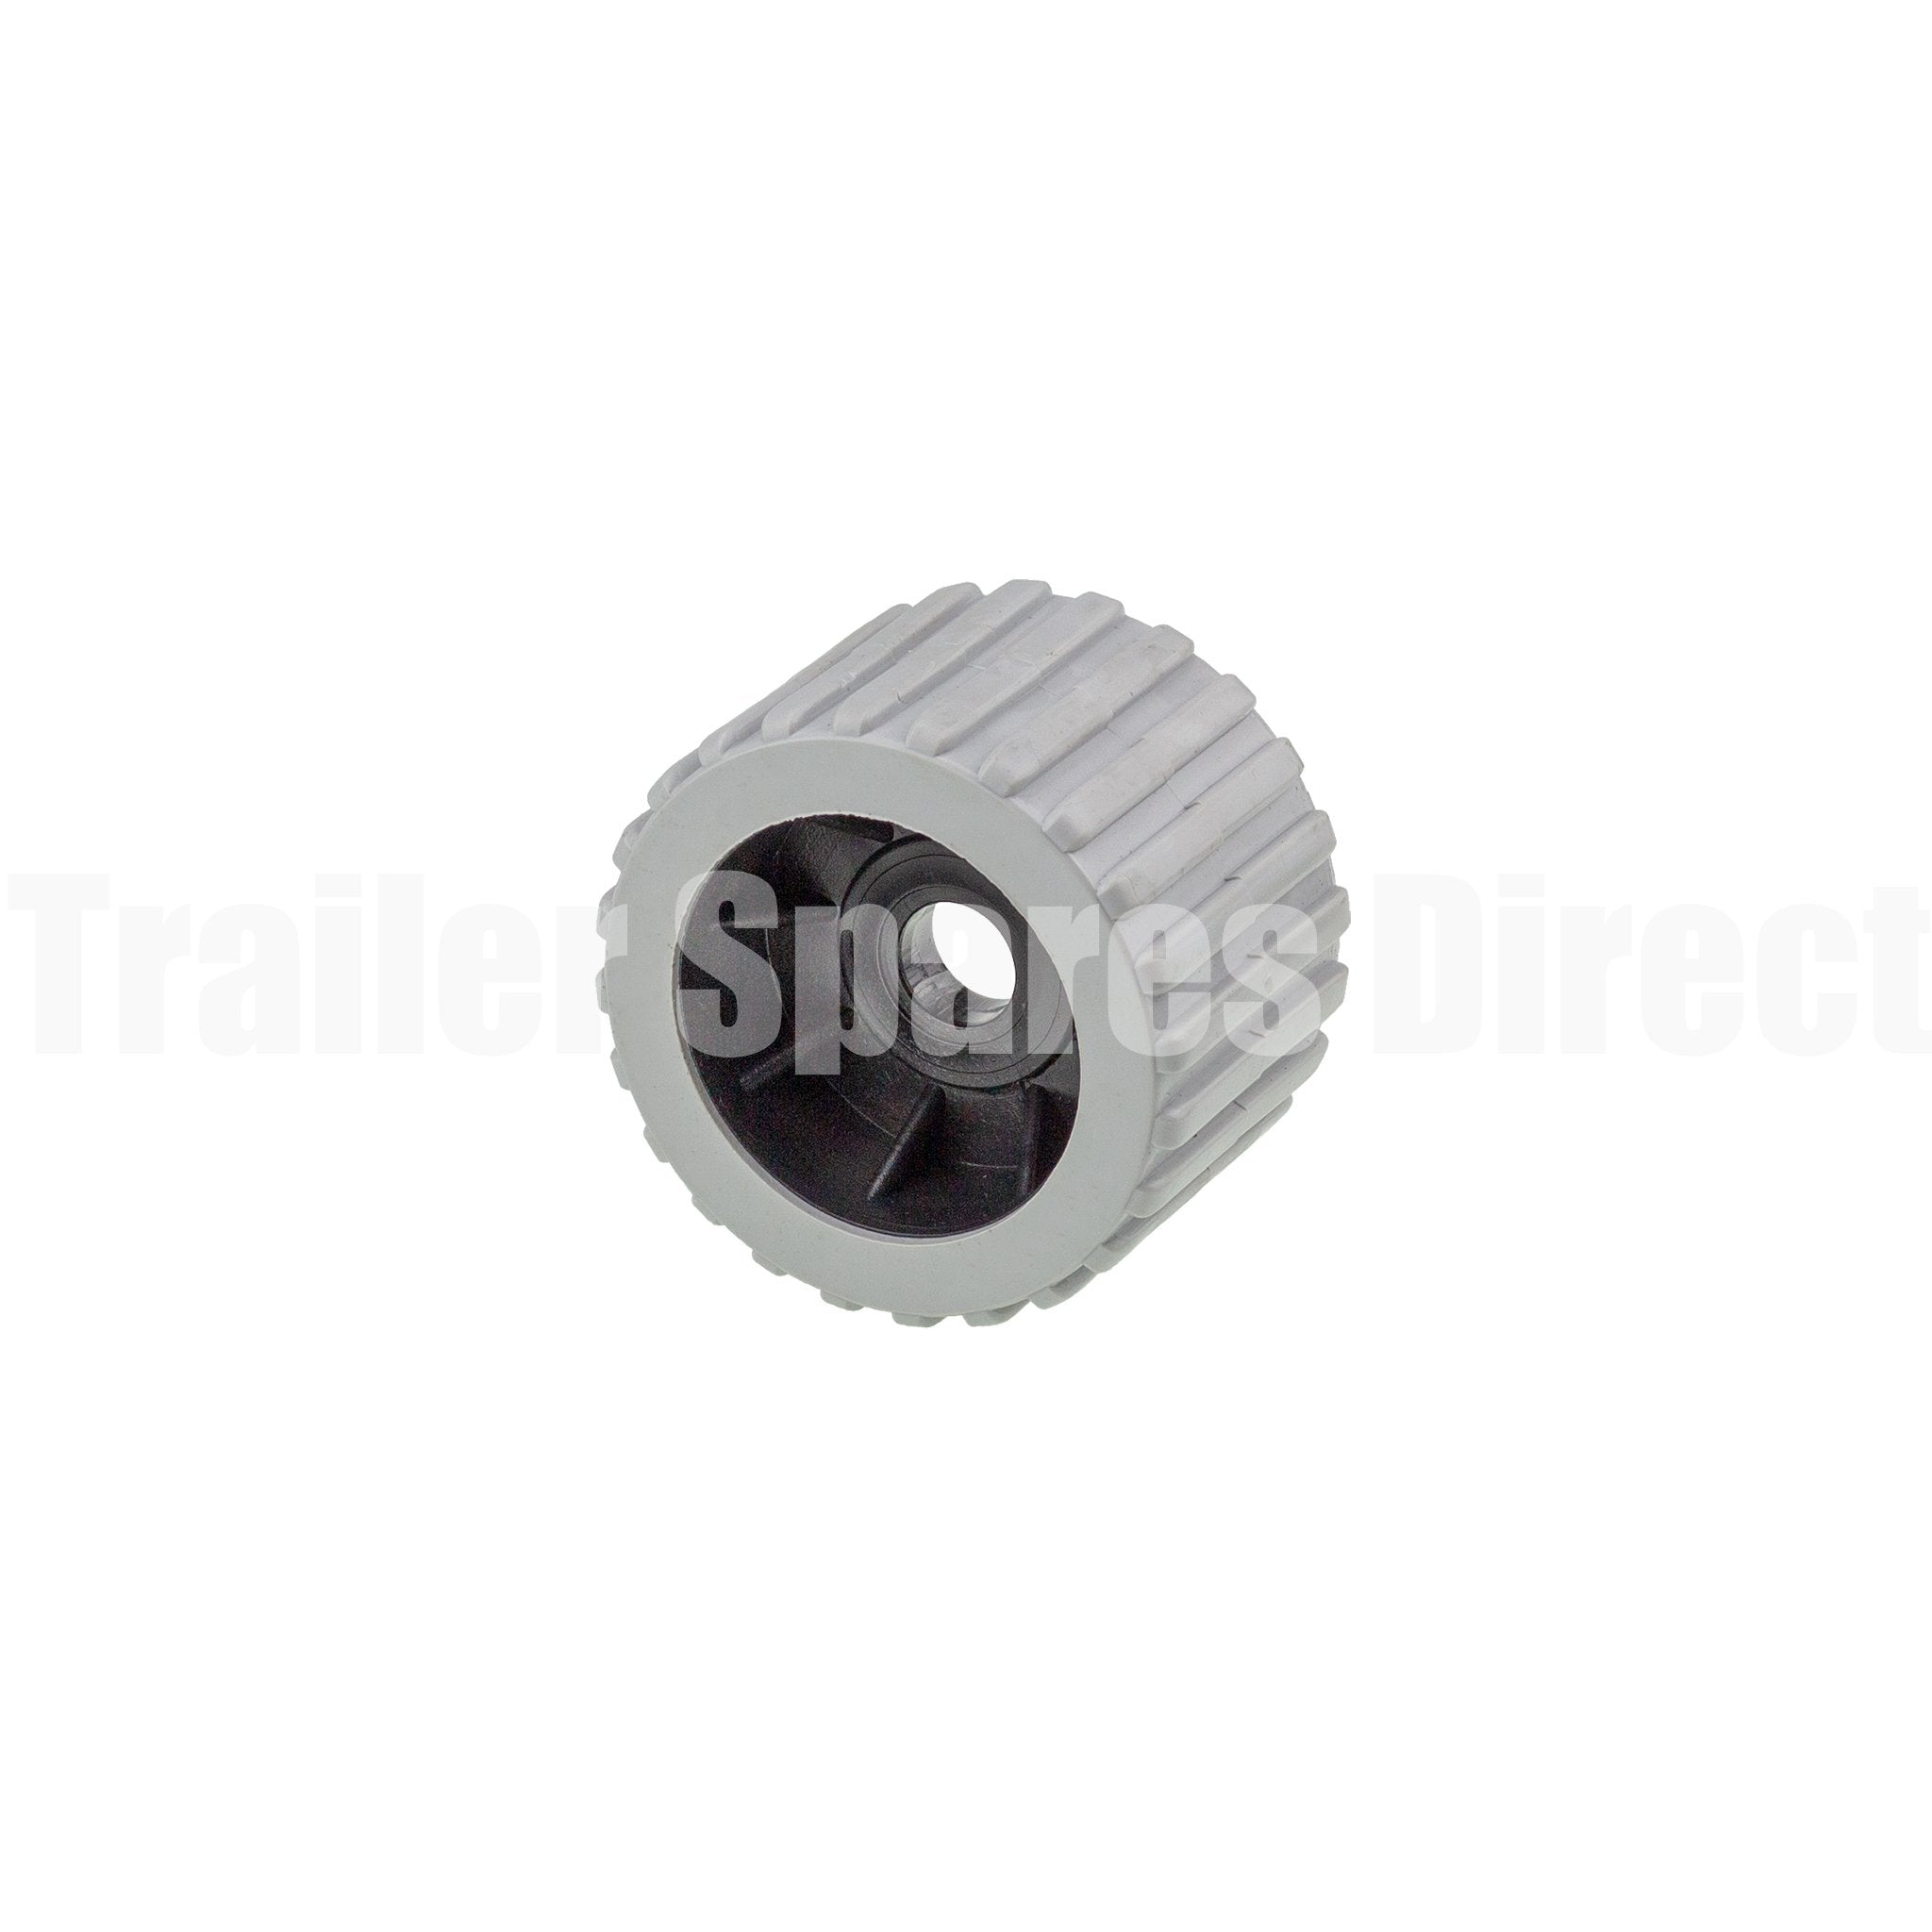 wobble roller grey ribbed 20mm centre hole